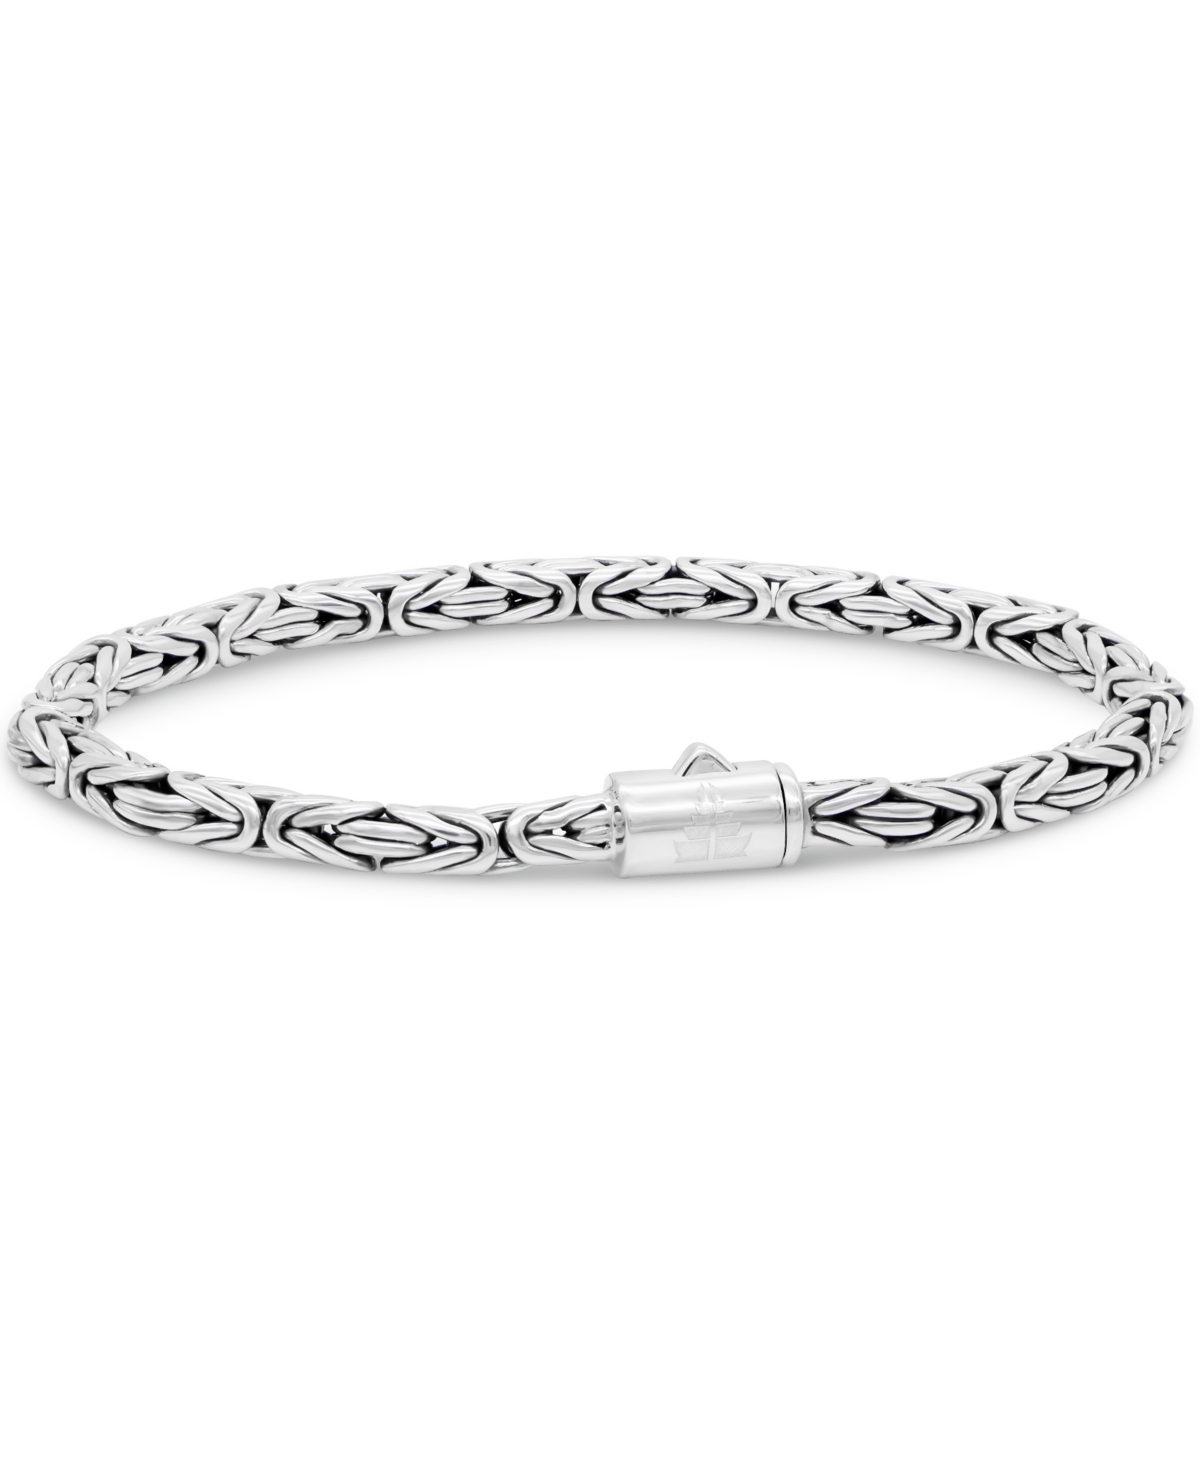 Borobudur Round 4mm Chain Bracelet in Sterling Silver - Silver